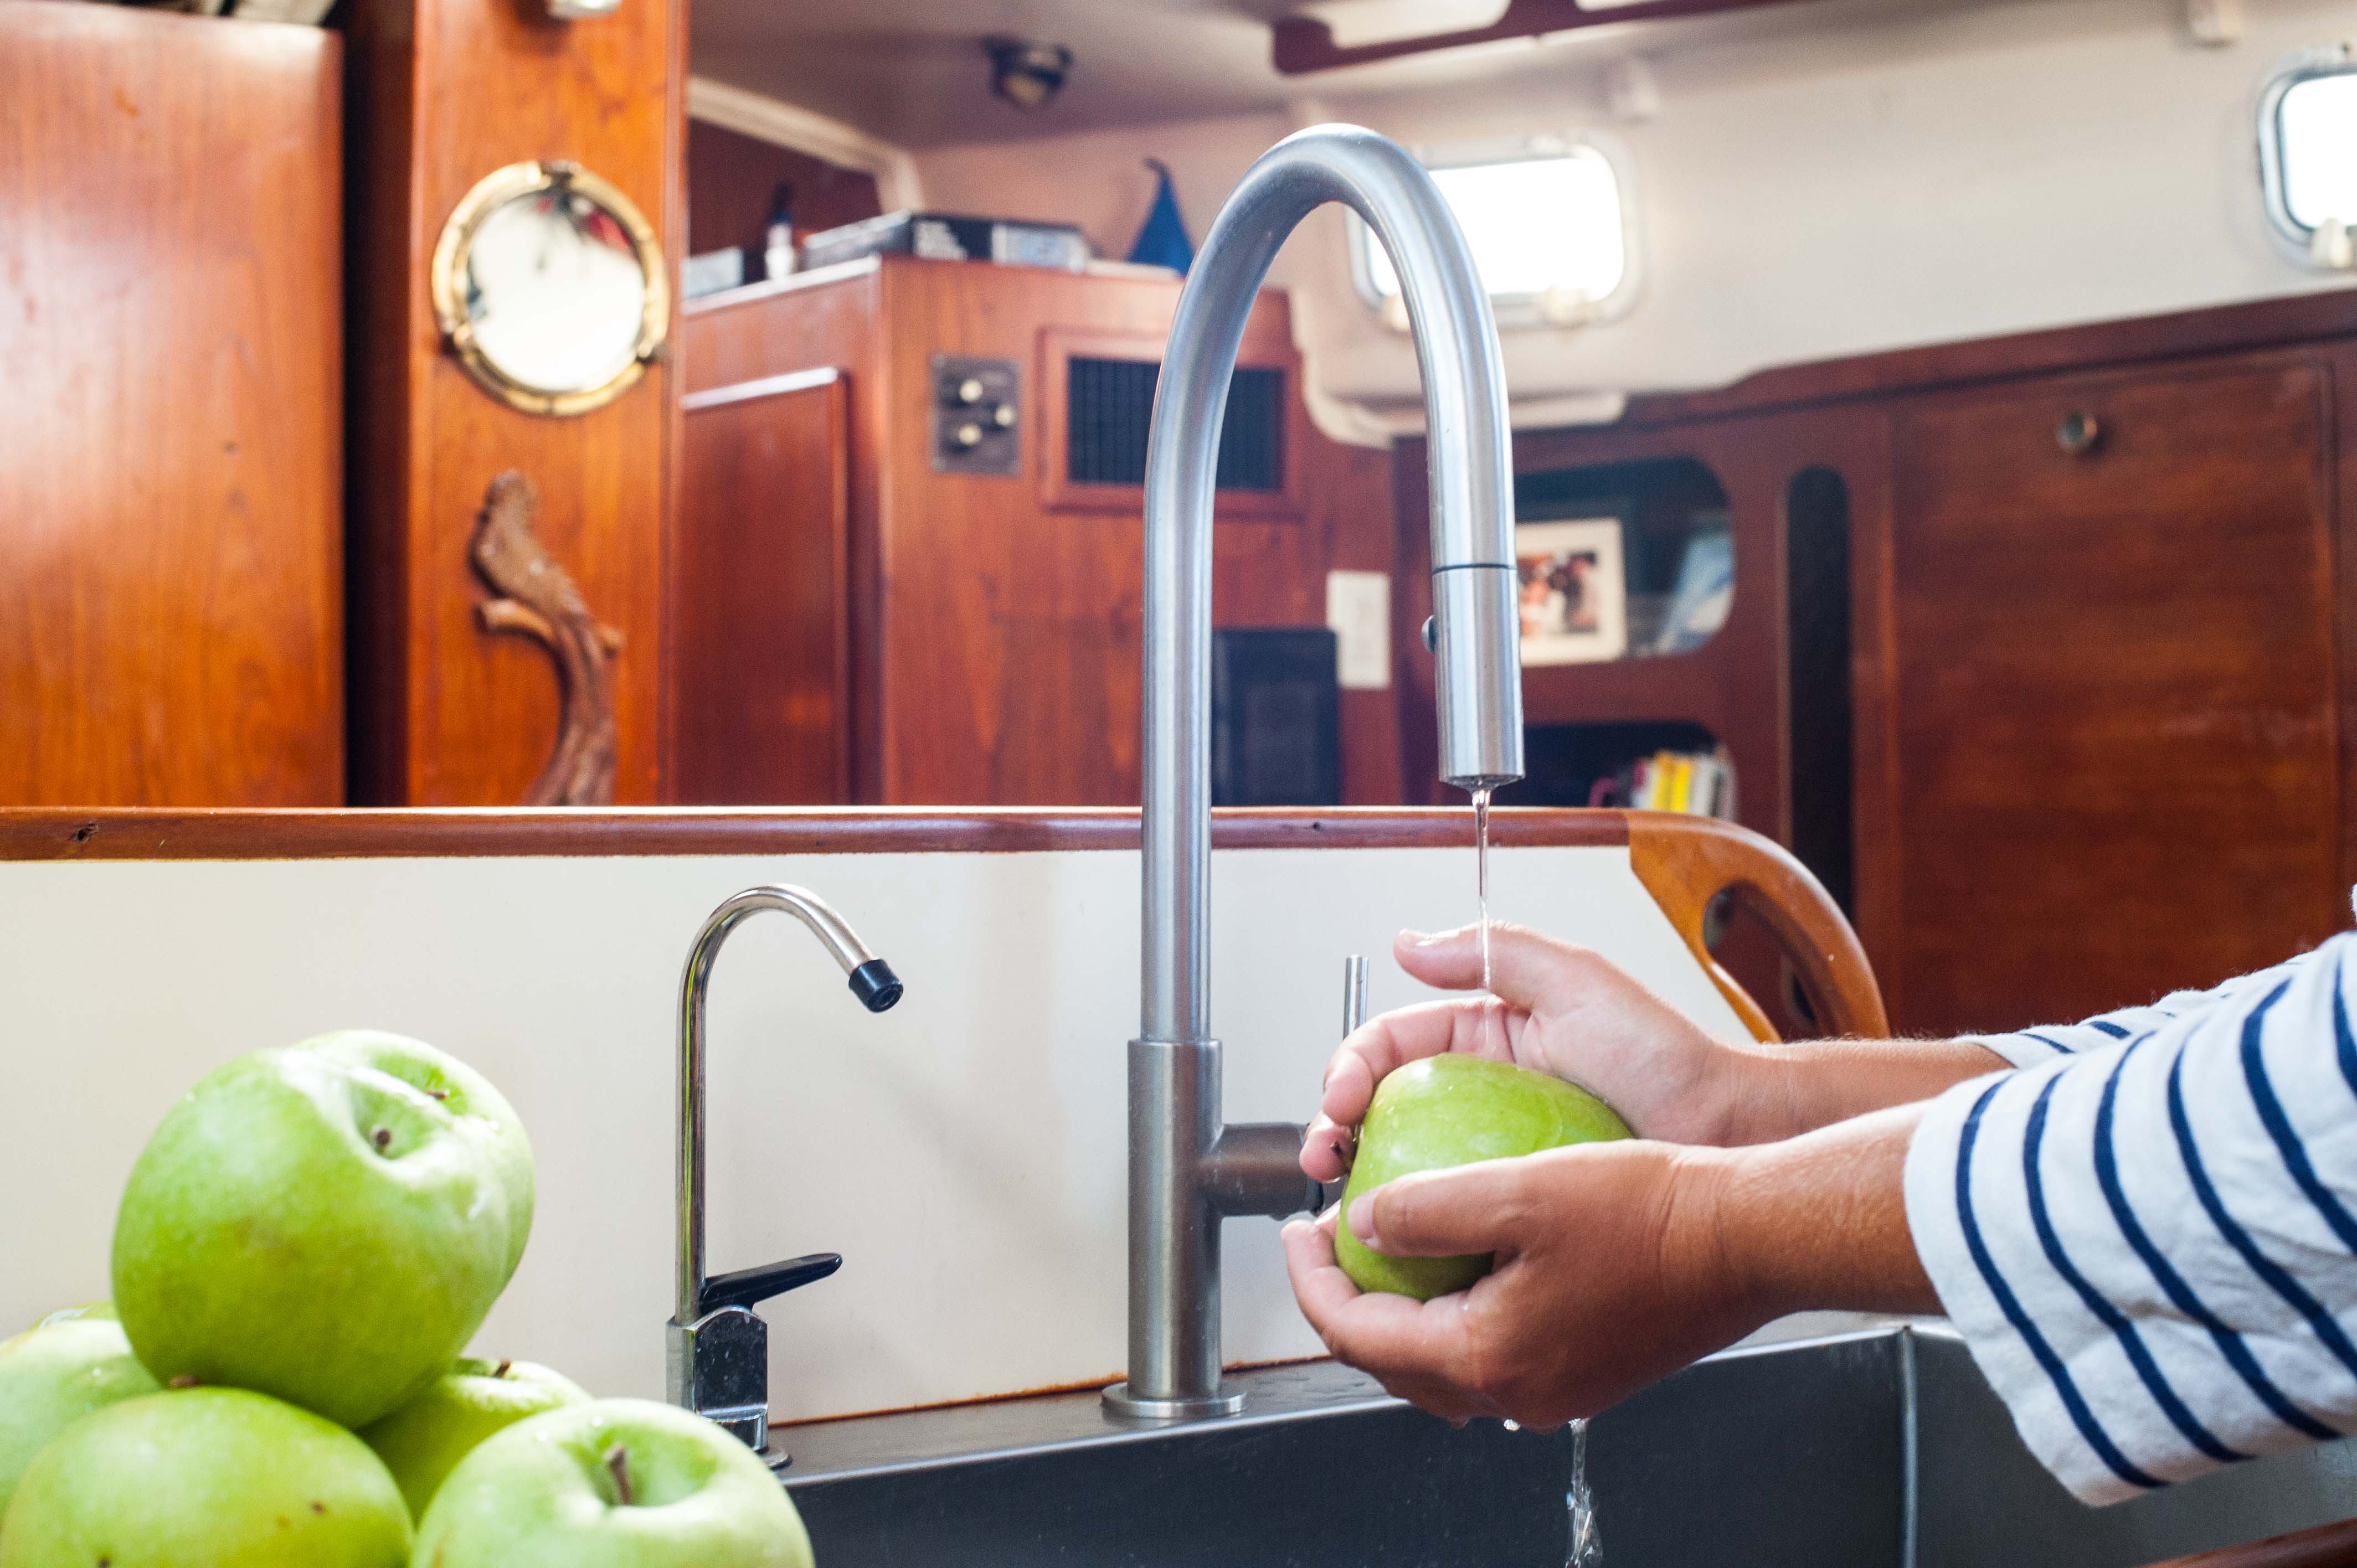 Washing apples in galley sink on sailboat